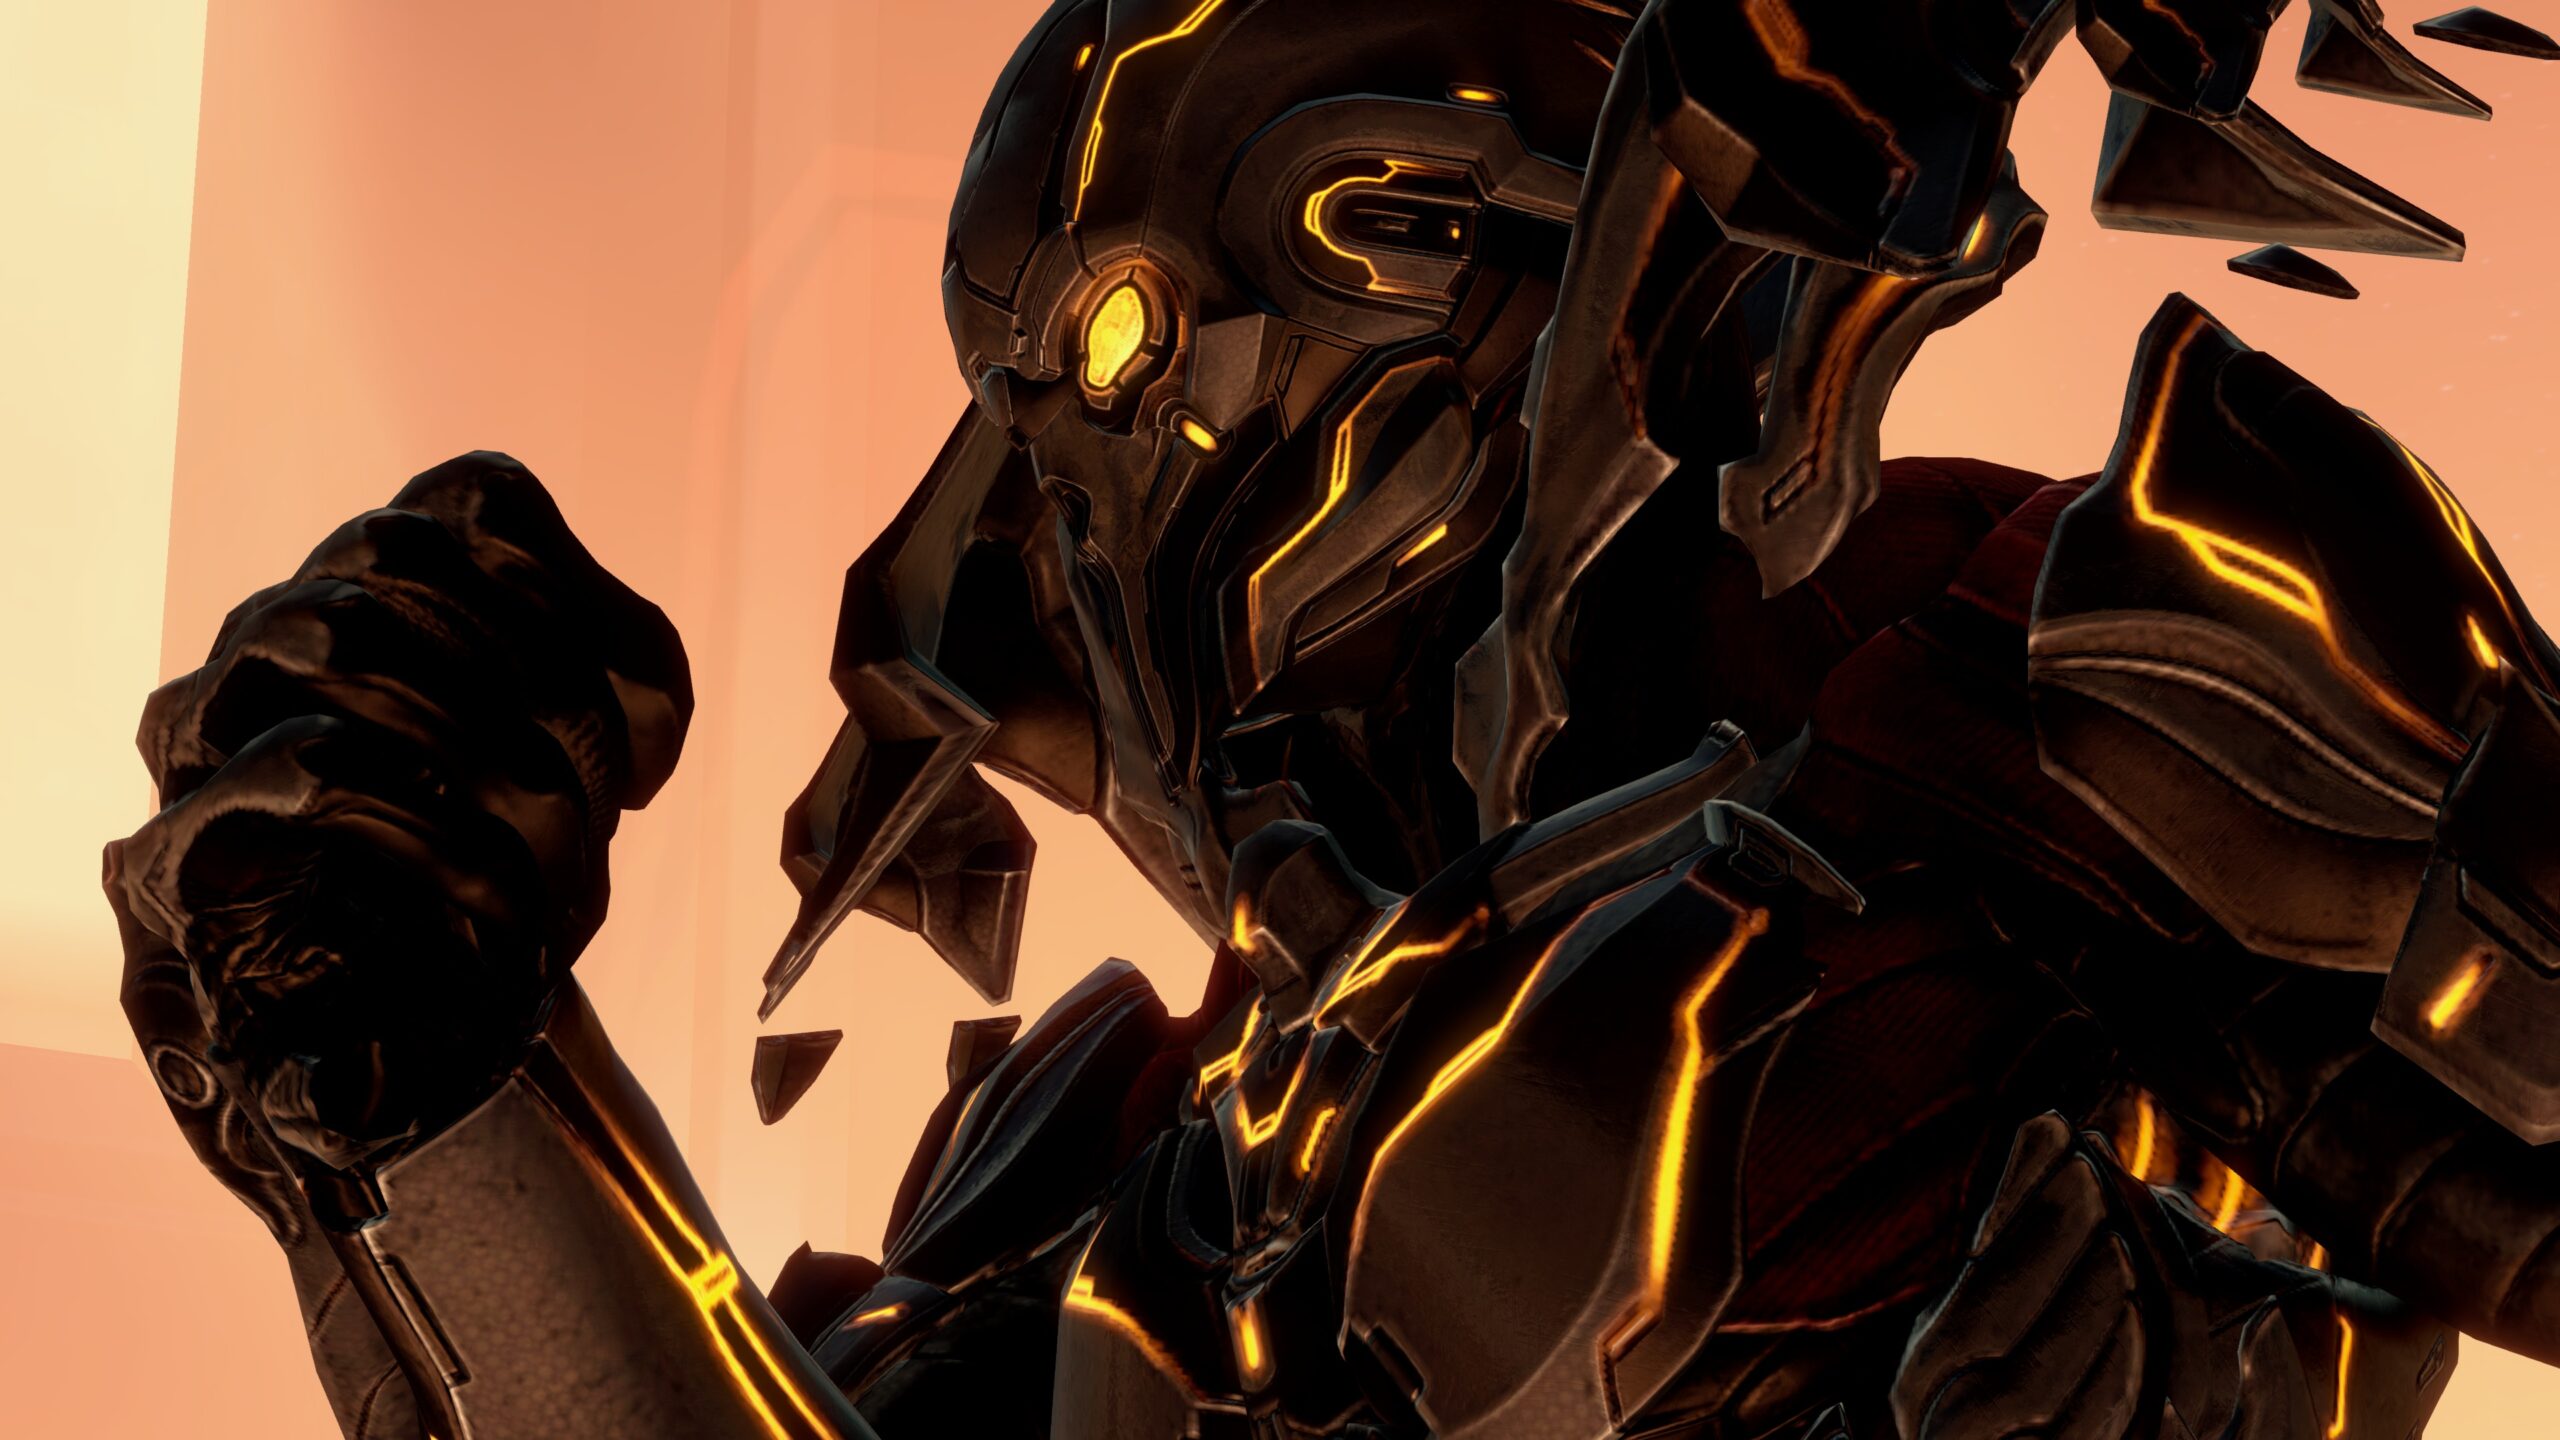 Halo 4 in-game screenshot of the Ur-Didact